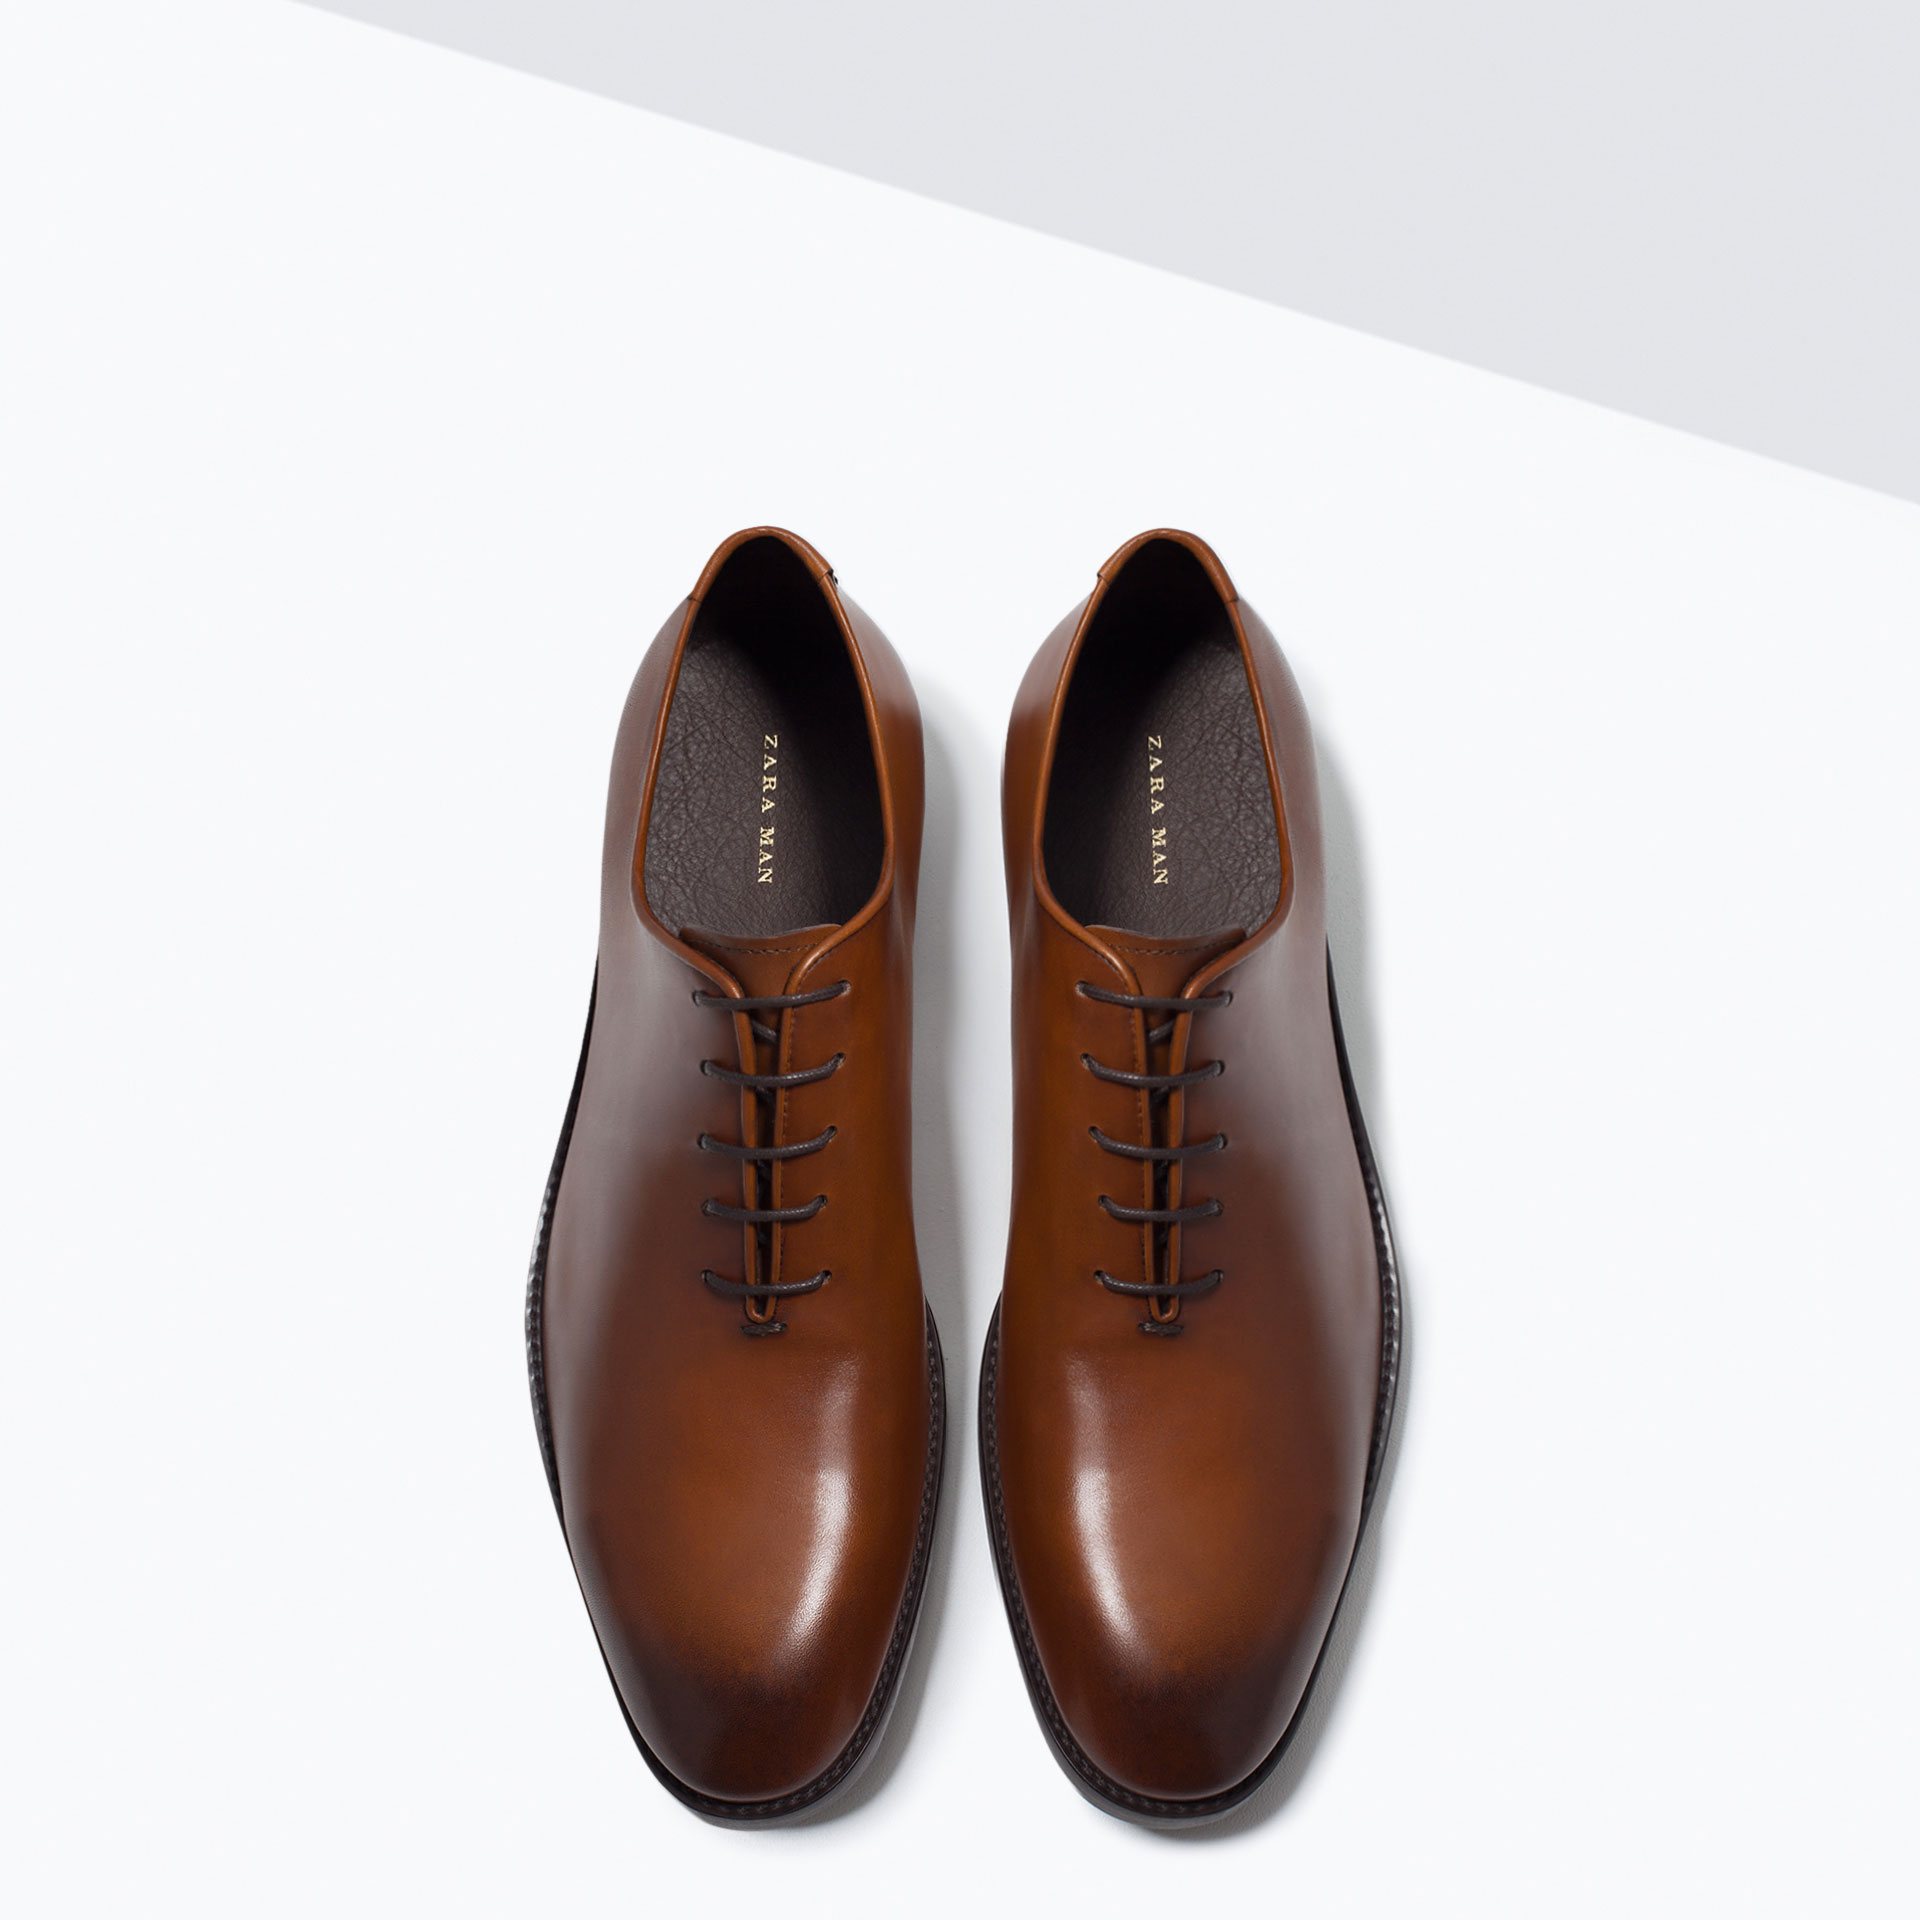  Zara  One Piece Leather Shoes  in Brown for Men  Lyst